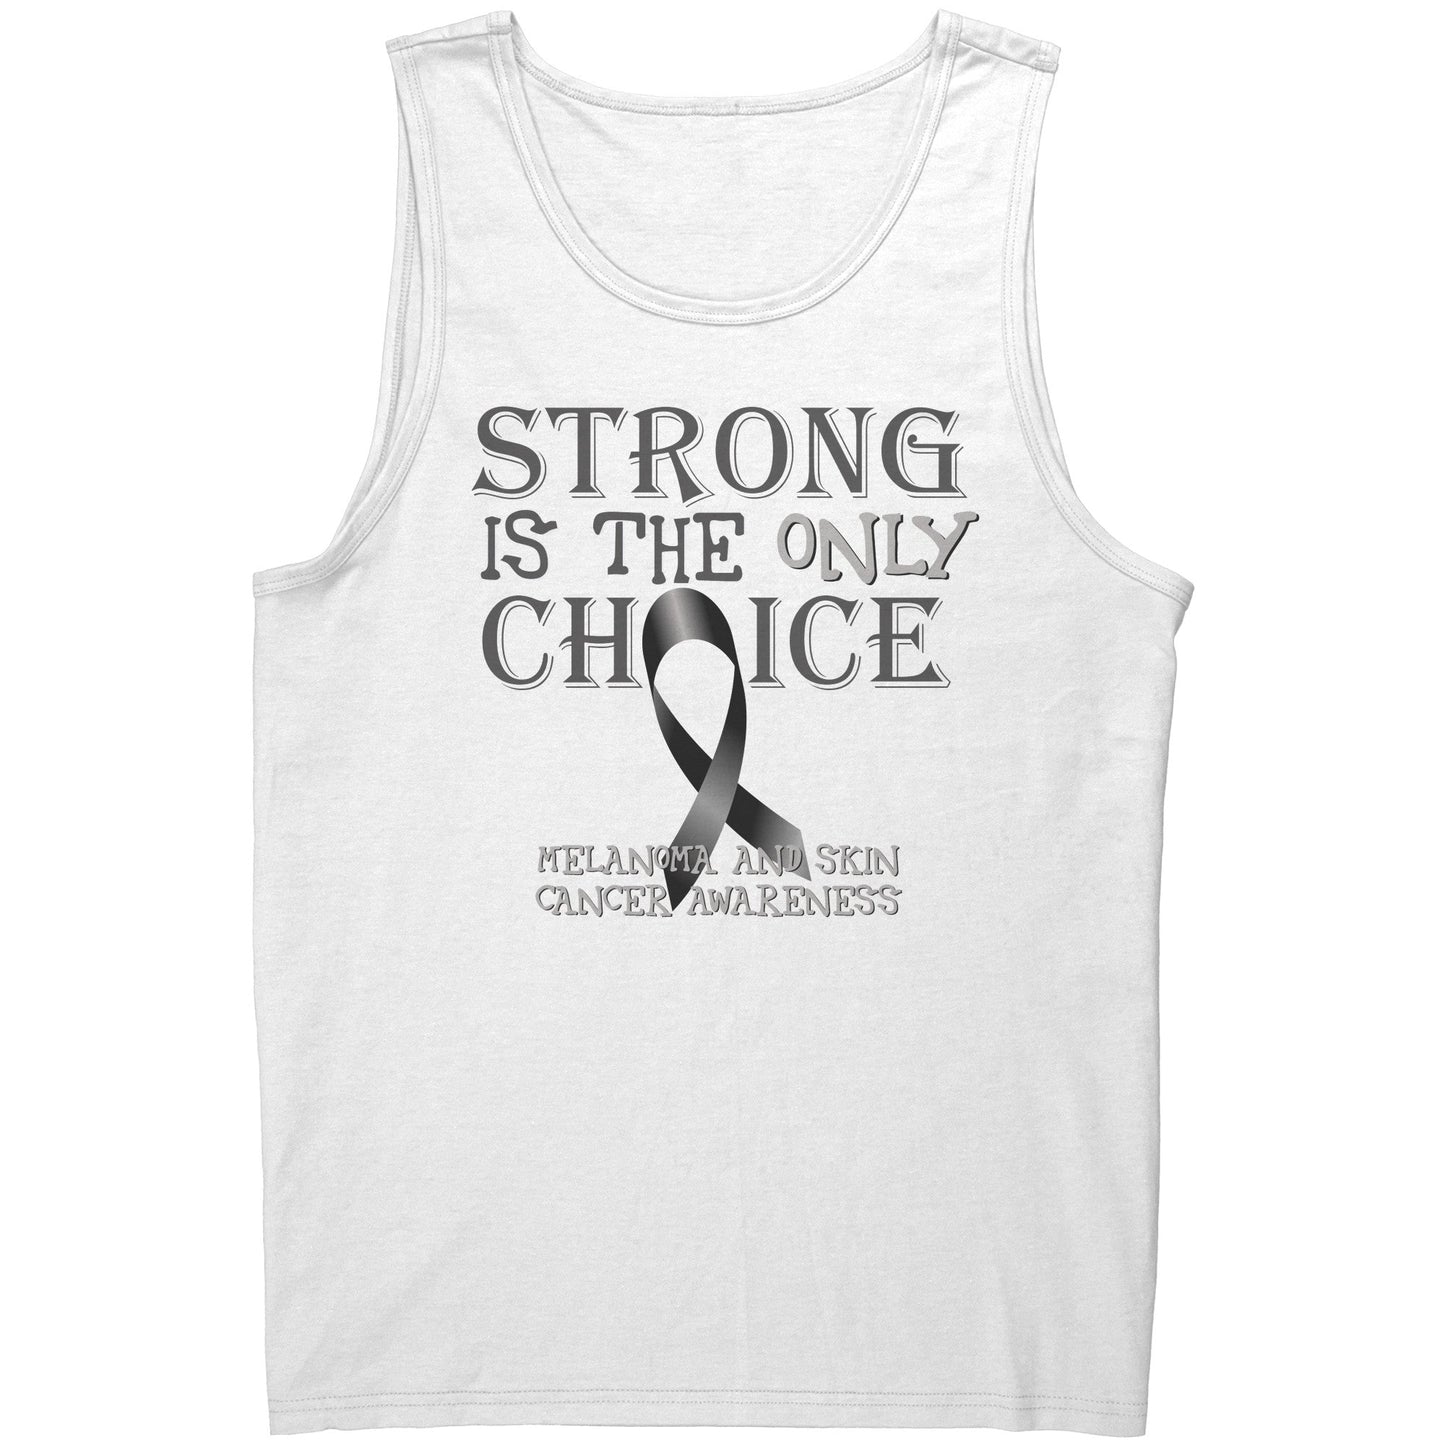 Strong is the Only Choice -Melanoma and Skin Cancer Awareness T-Shirt, Hoodie, Tank |x|